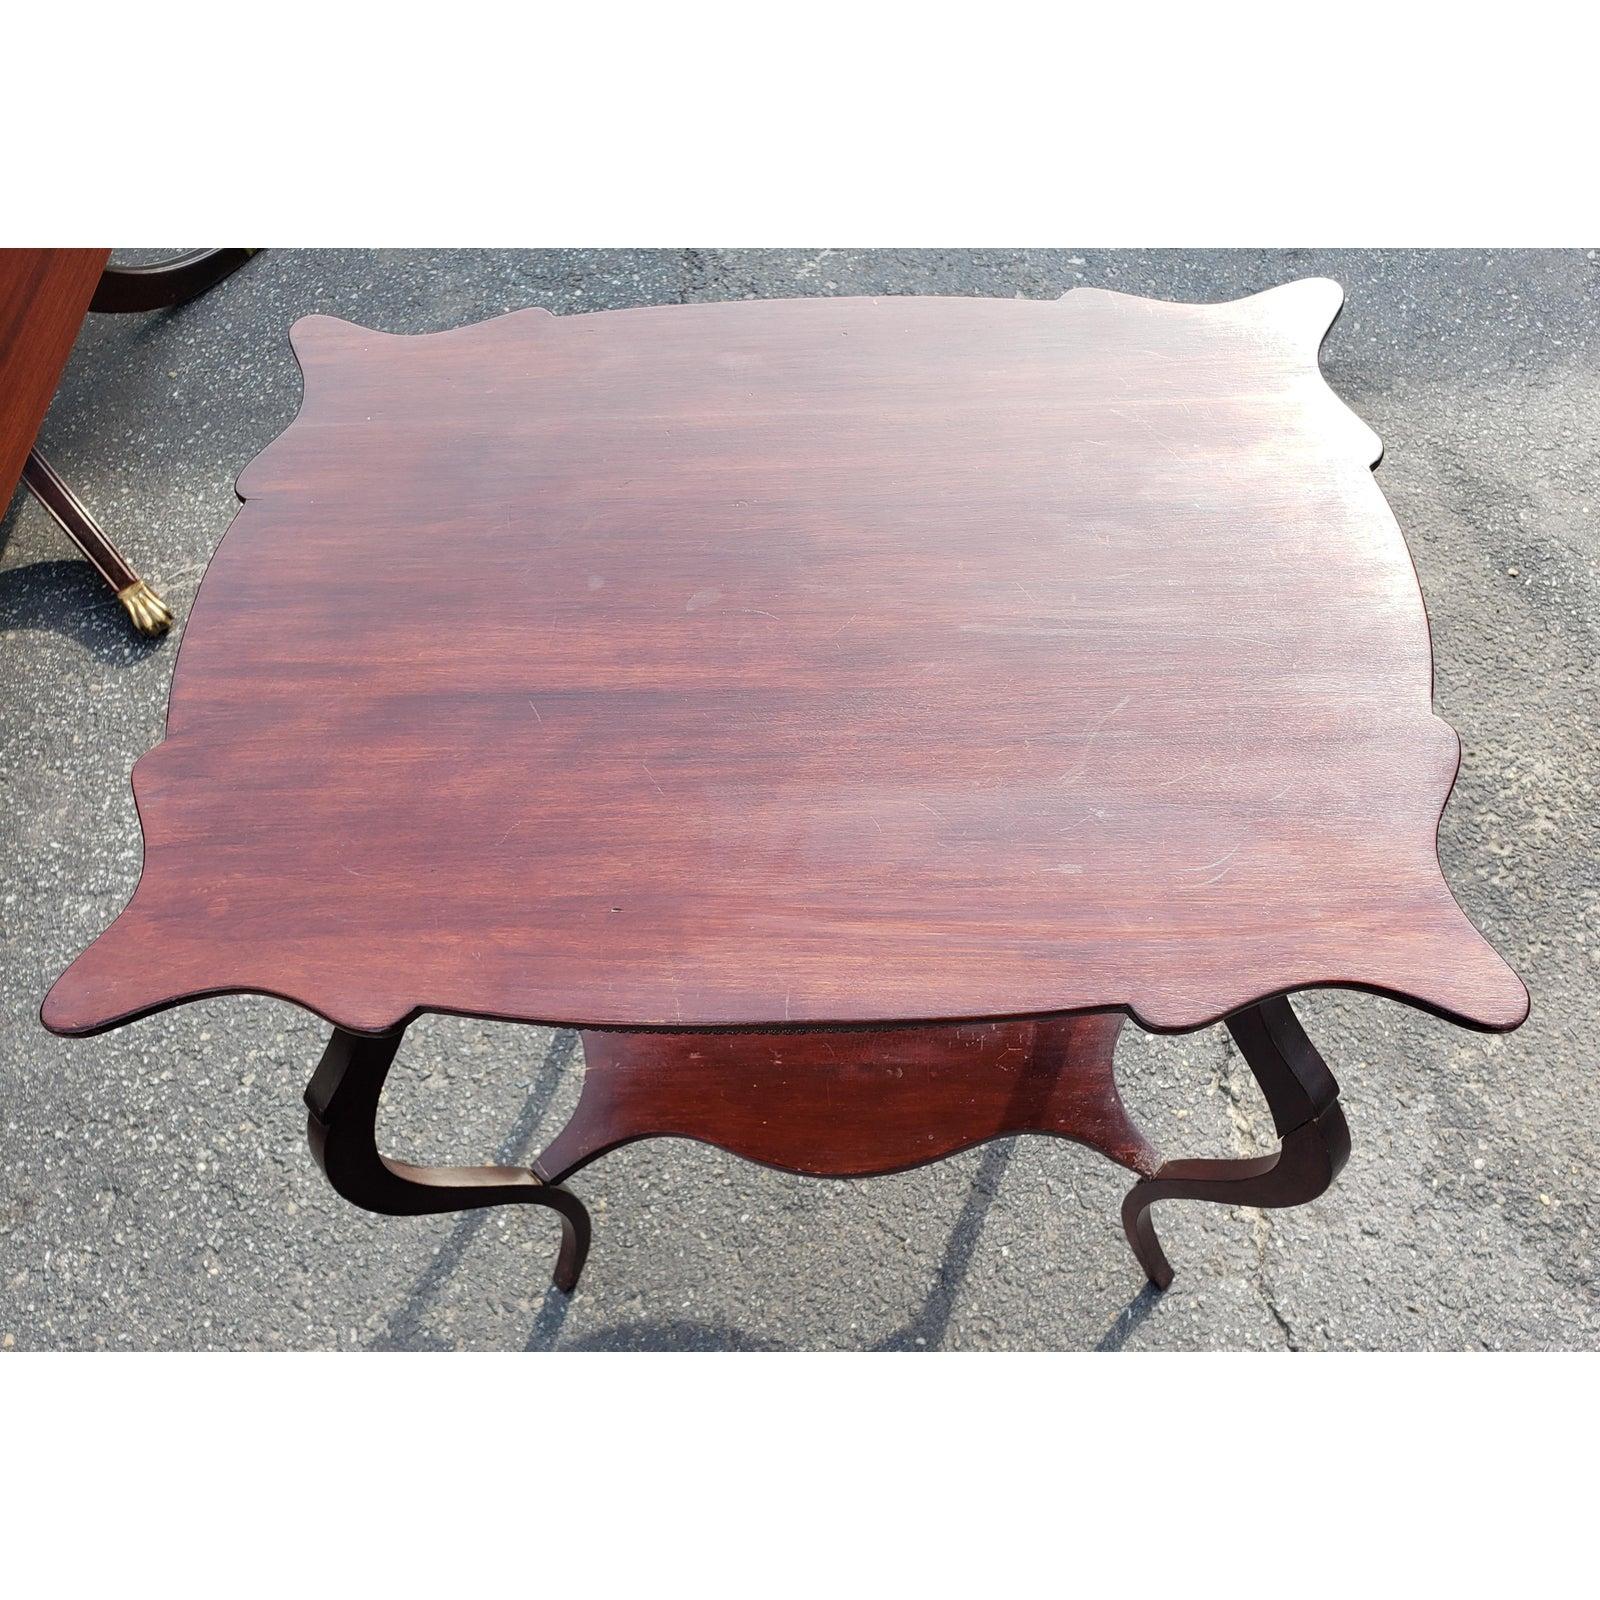 Antique solid mahogany occasional table with waved legs and unique top shape.
We noticed that a leg has been repaired at some point, but apparently not noticeable to our opinion.
  